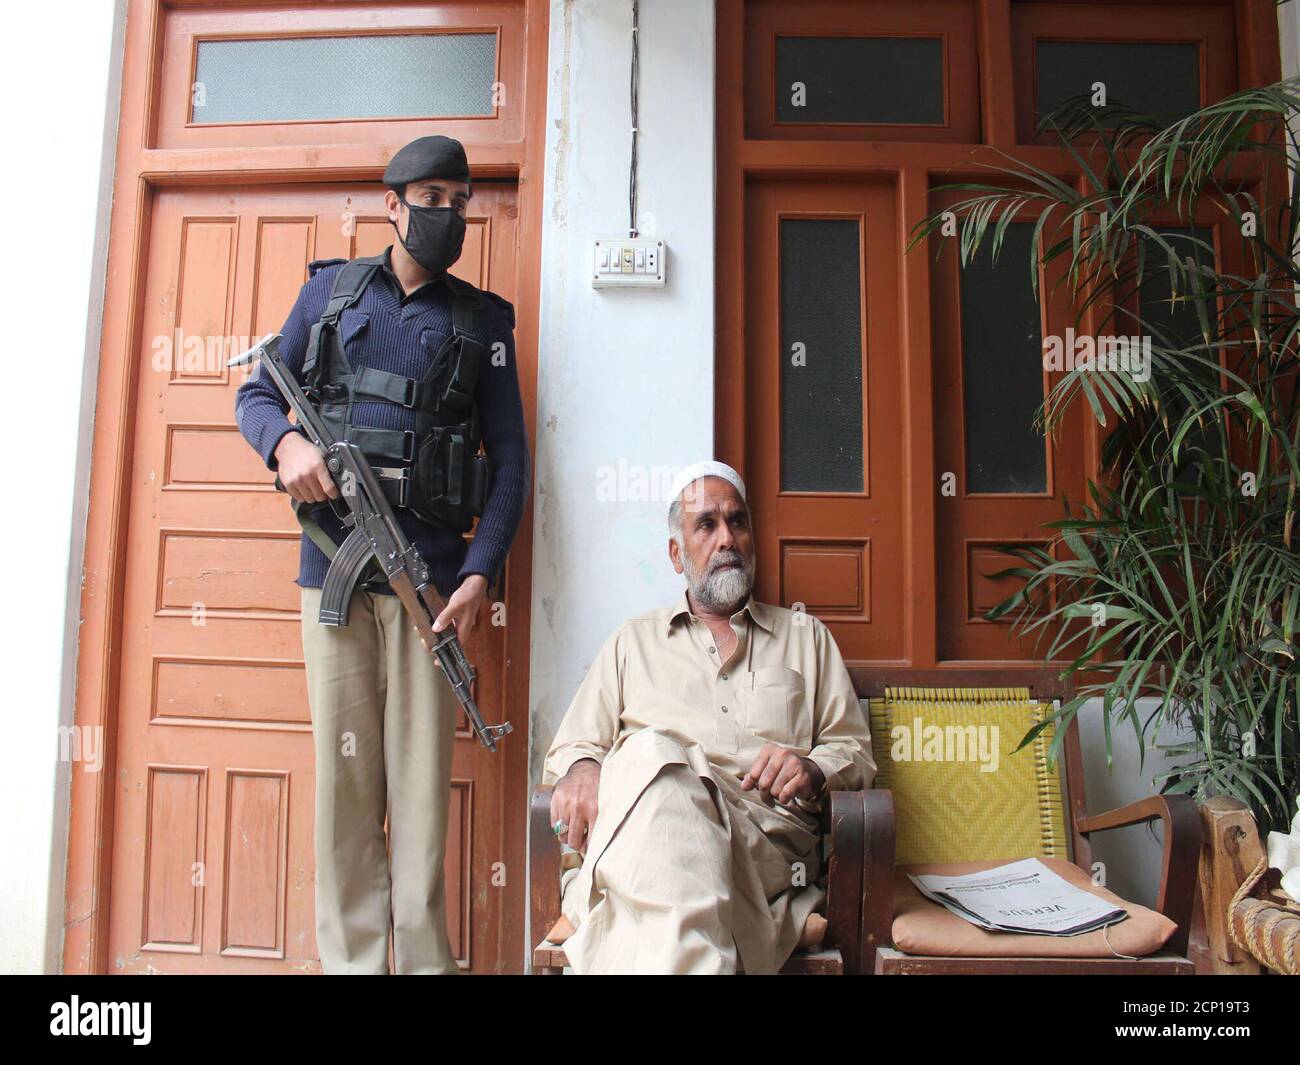 Swat Valley shopkeeper Abdur Rahim speaks with a Reuters correspondent as one of police bodyguards stands guard over him at his home in Mingora, Pakistan November 22, 2016. REUTERS/Hazrat Ali Bacha Stock Photo